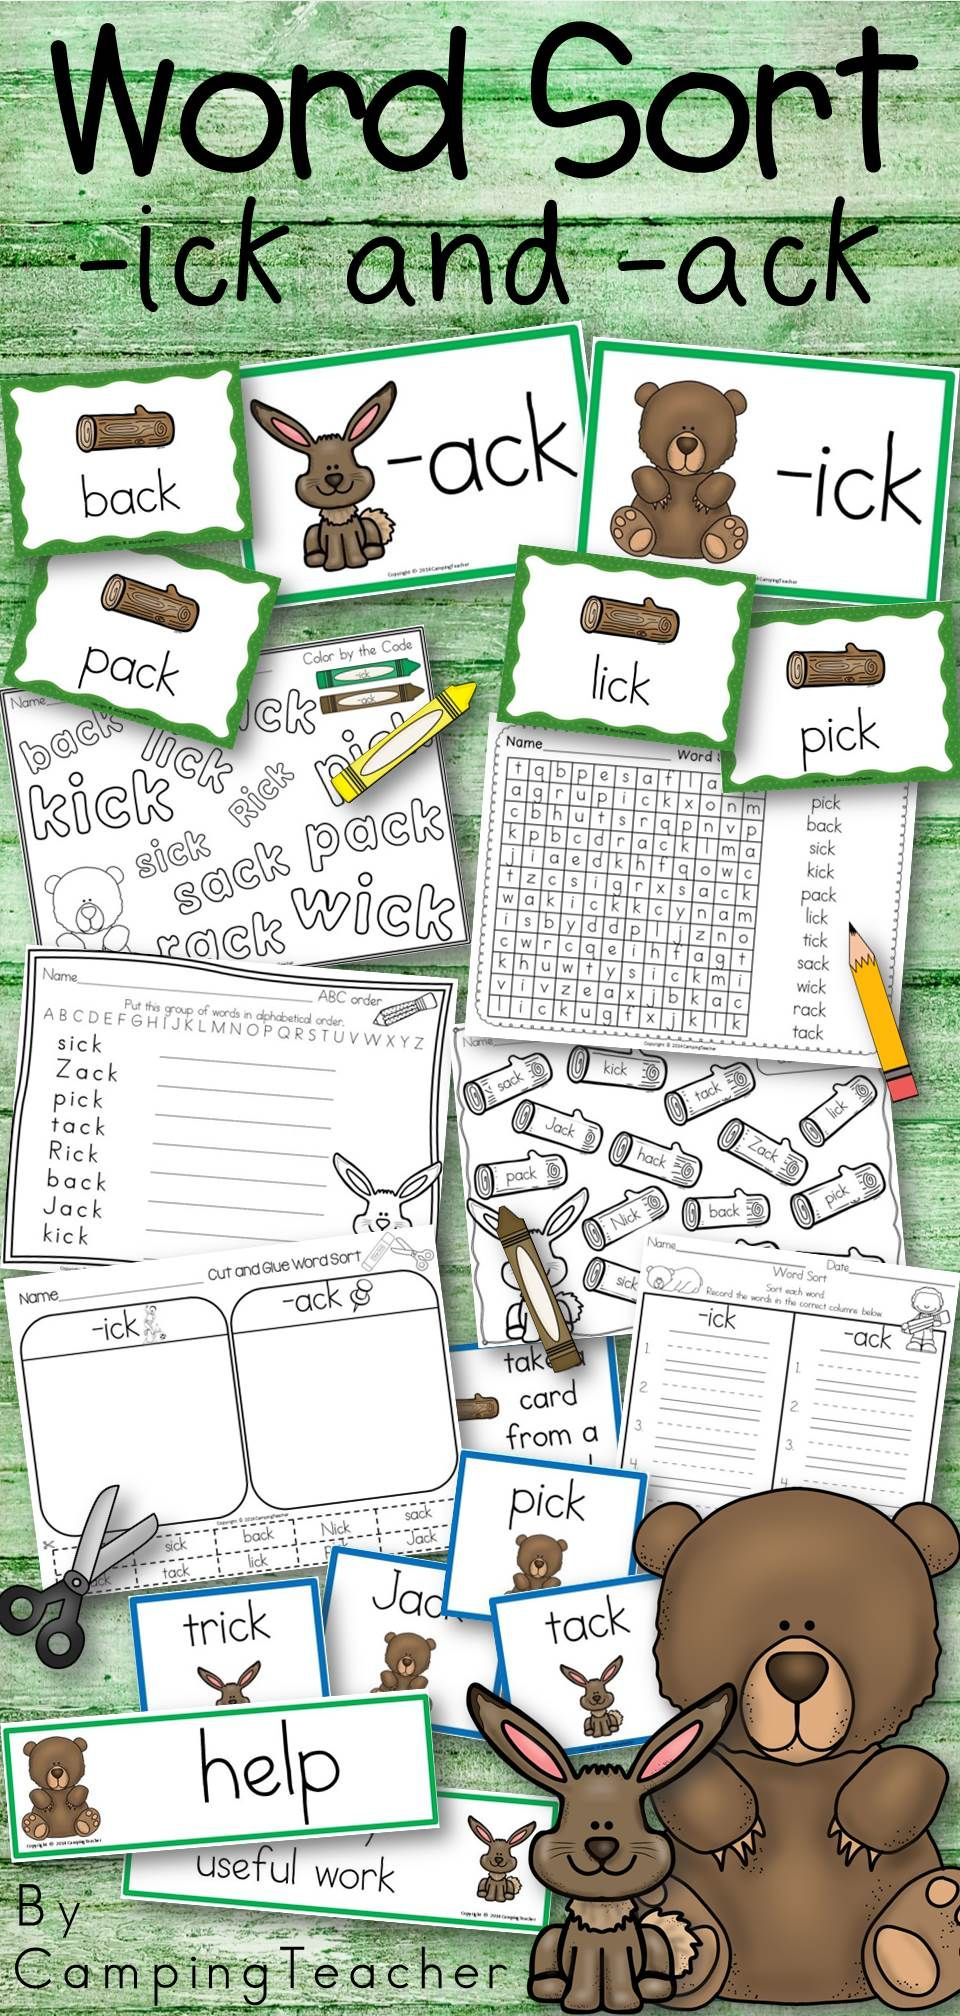 Word Sort -Ack And -Ick Word Families Story Jack And Rick